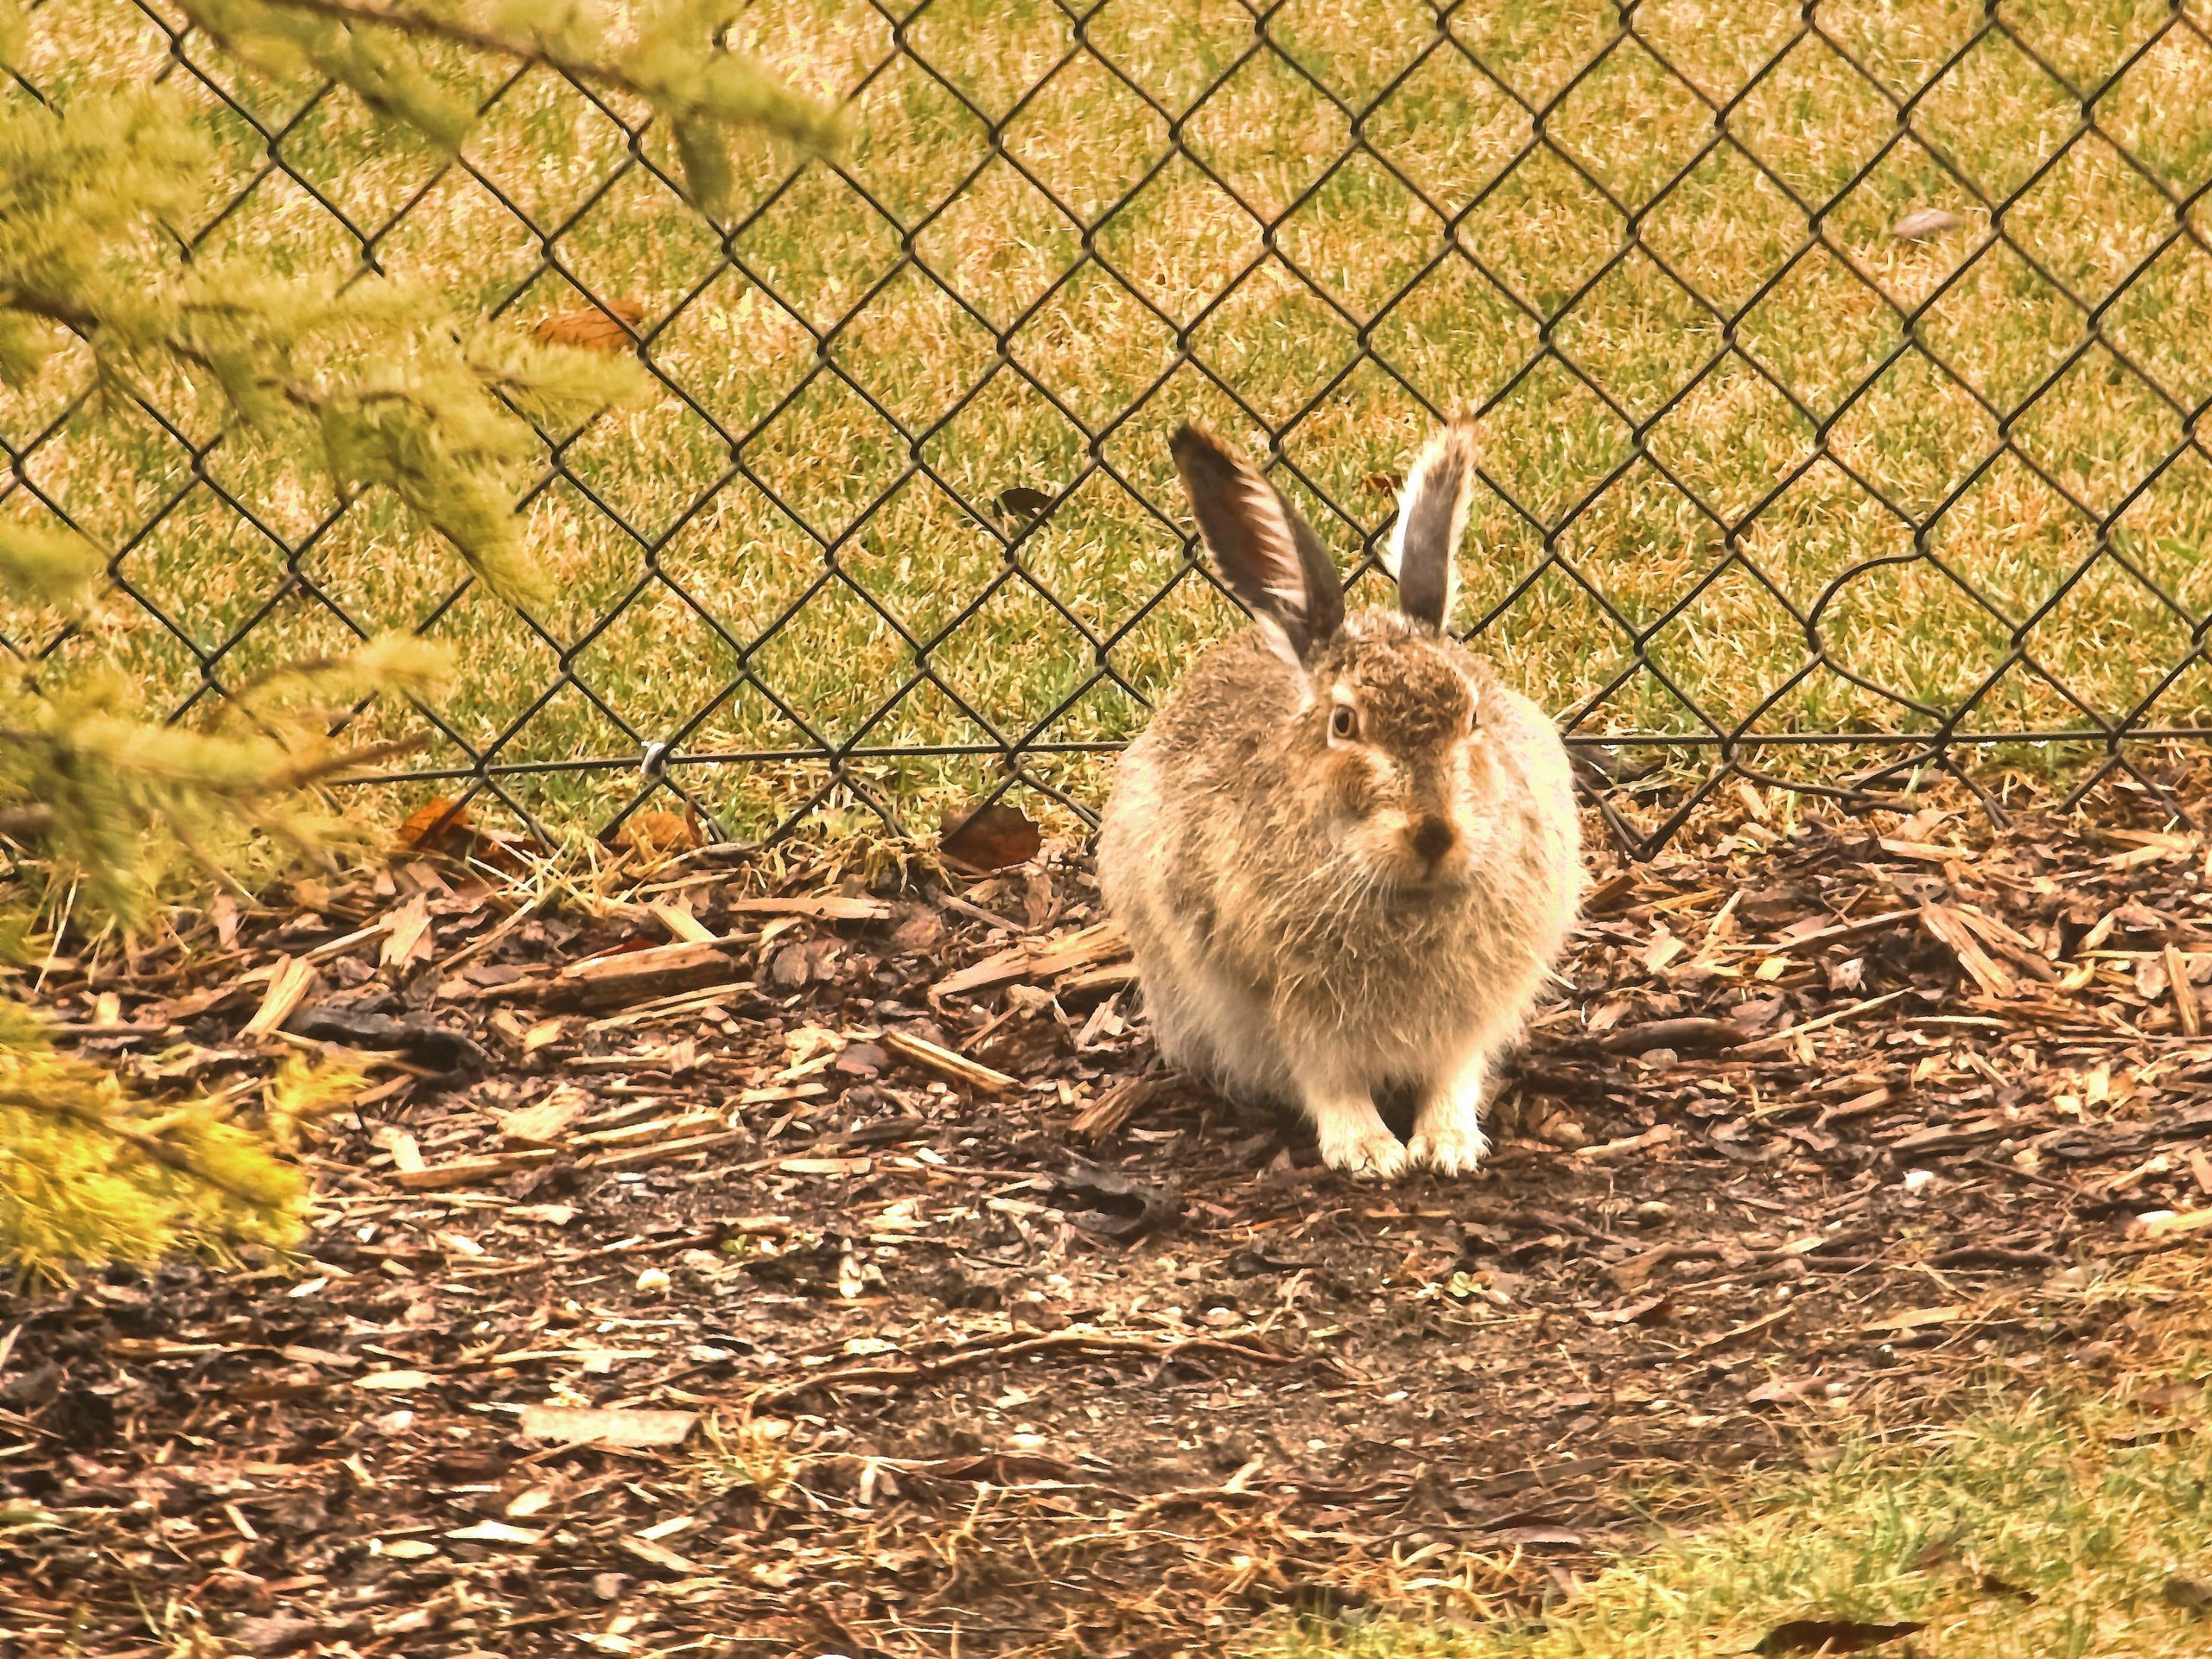 What To Feed Wild Rabbits In My Backyard